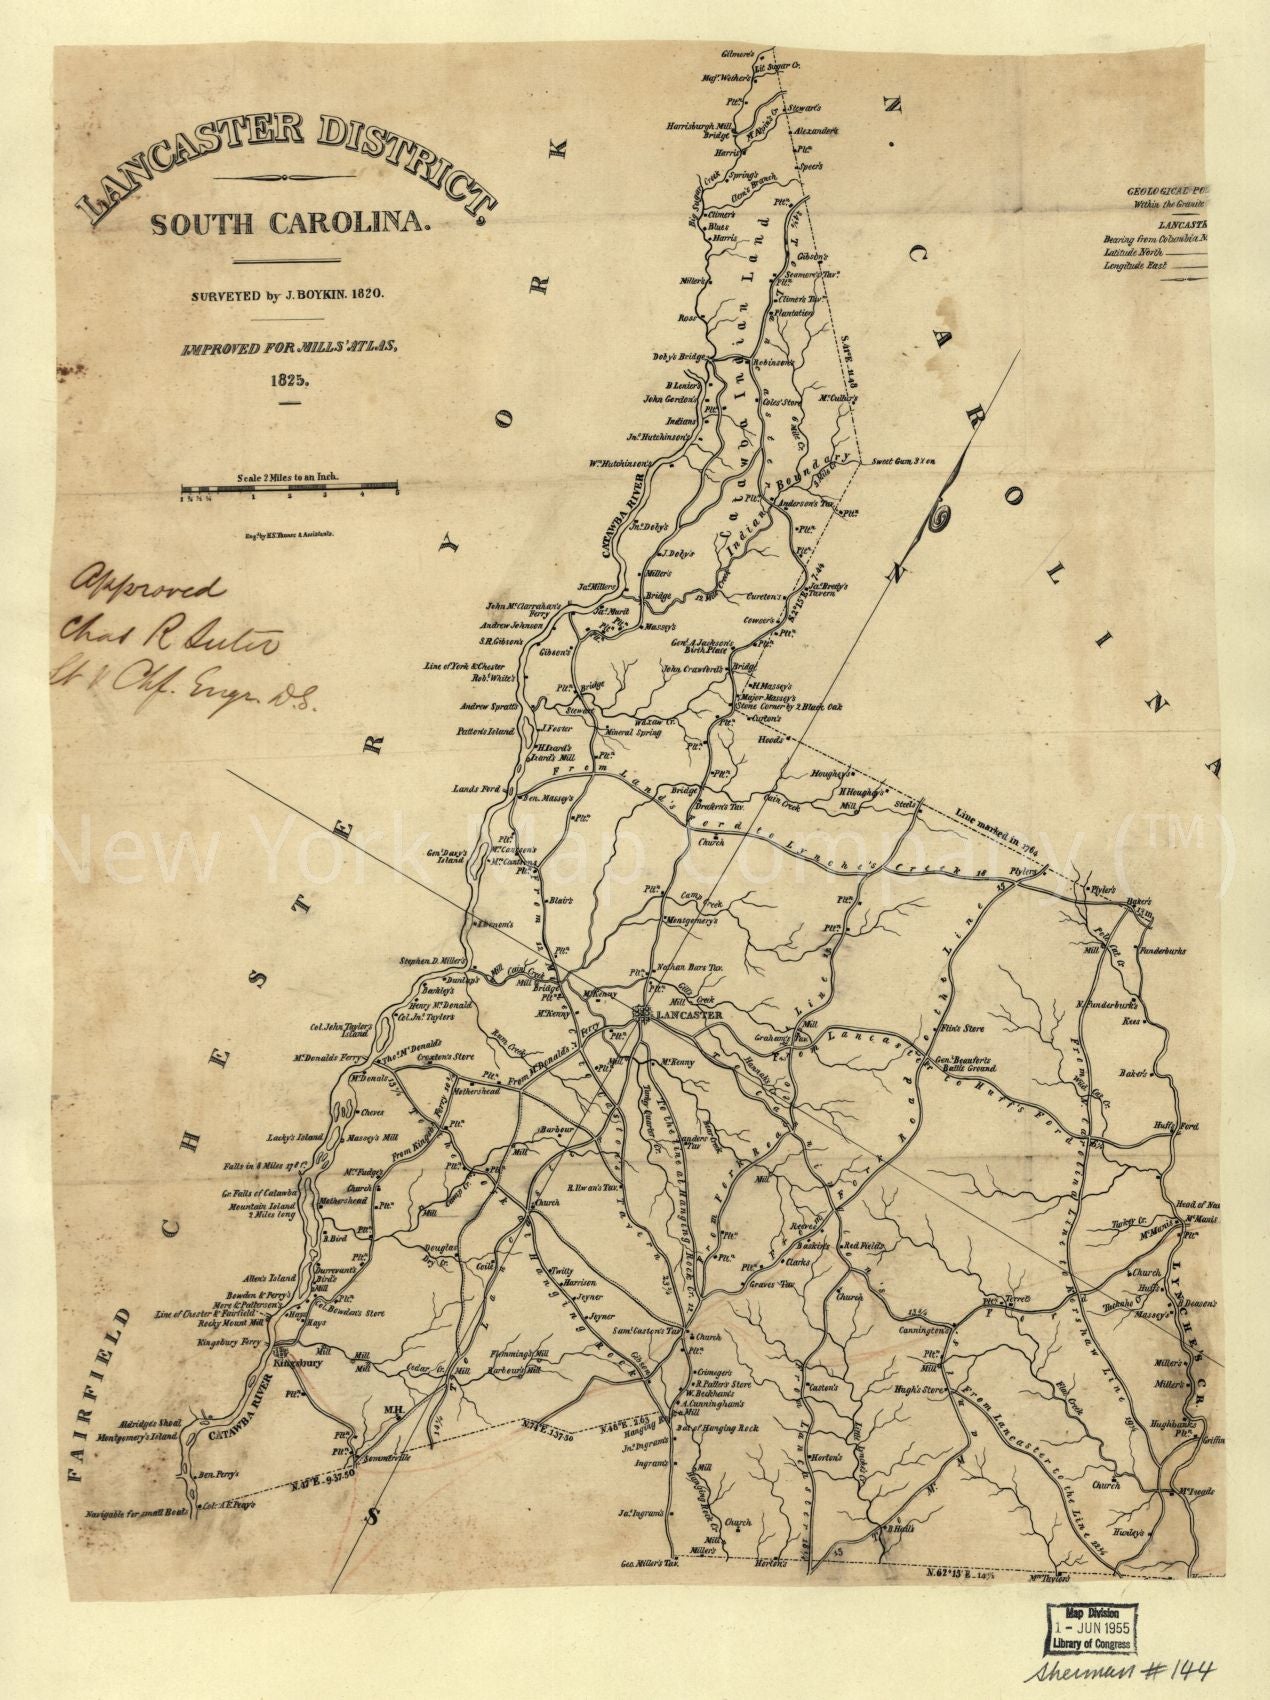 1825 map Lancaster District, South Carolina Approved, Chas. R. Suter, Lt. and Chf. Engr., D. S. Map Subjects: Lancaster County | Lancaster County SC | South Carolina |